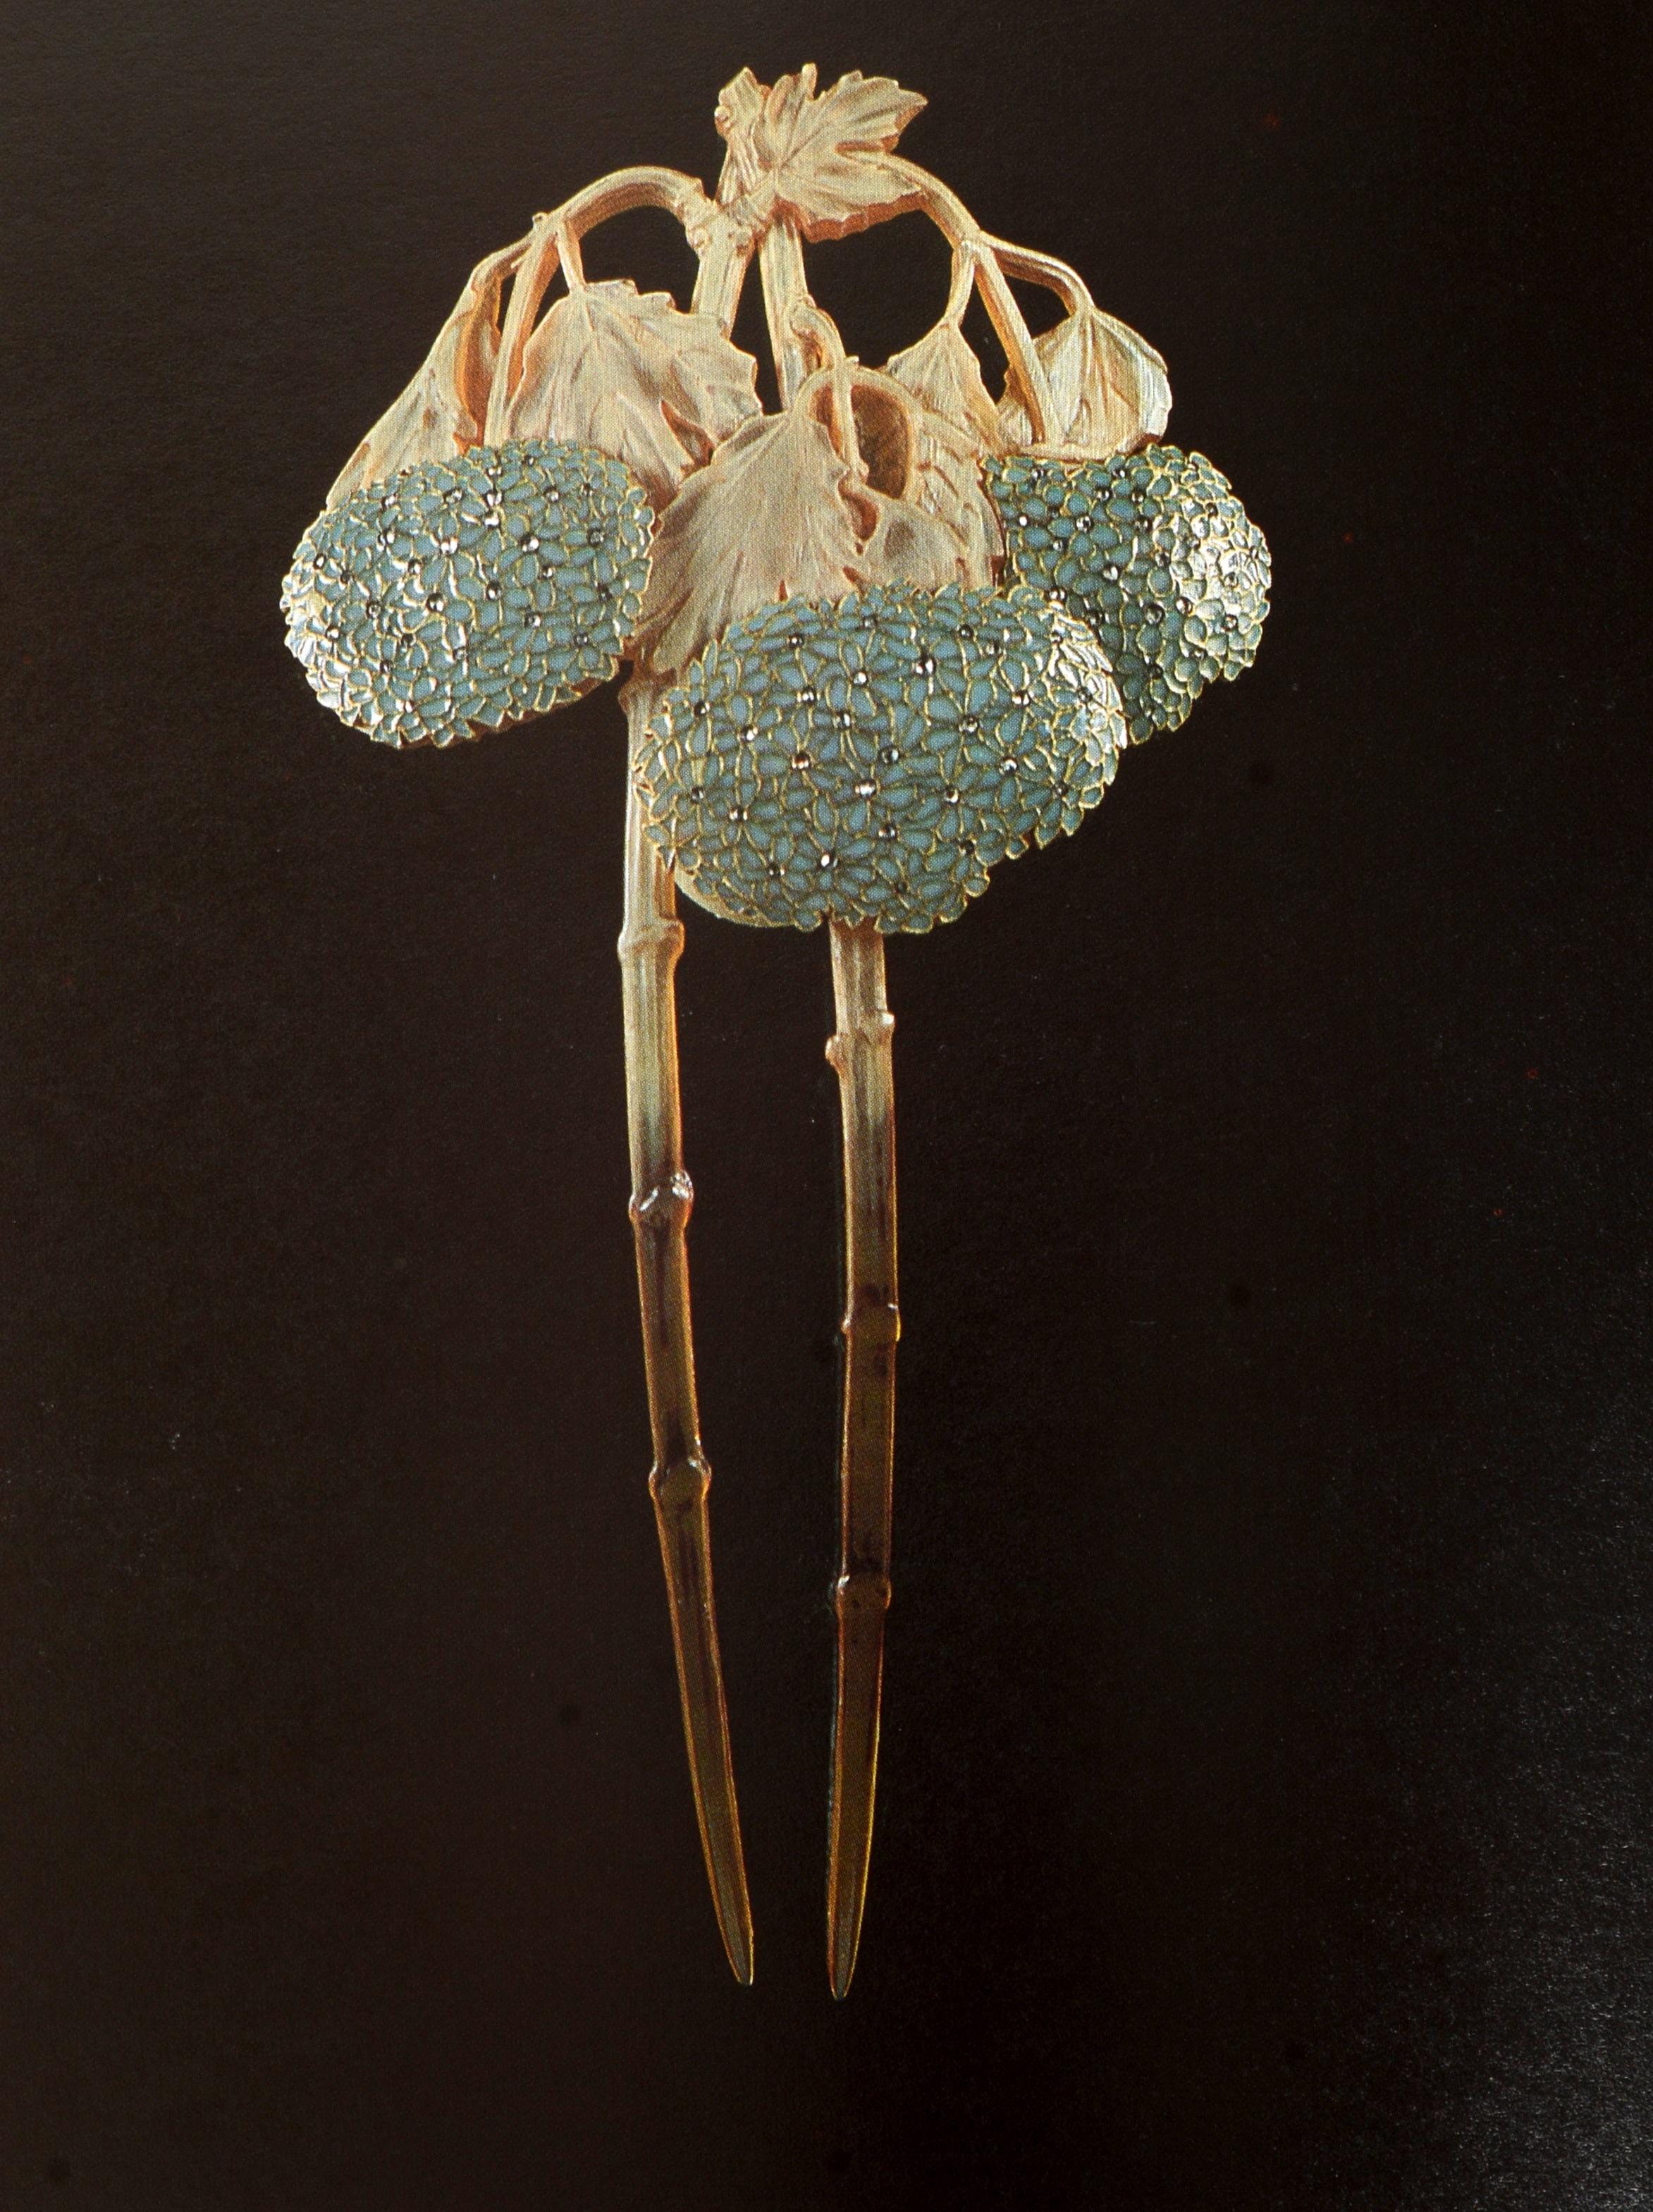 The Jewellery Of Rene Lalique Goldsmith's Company Exhibition, 28 May To 24 July 4